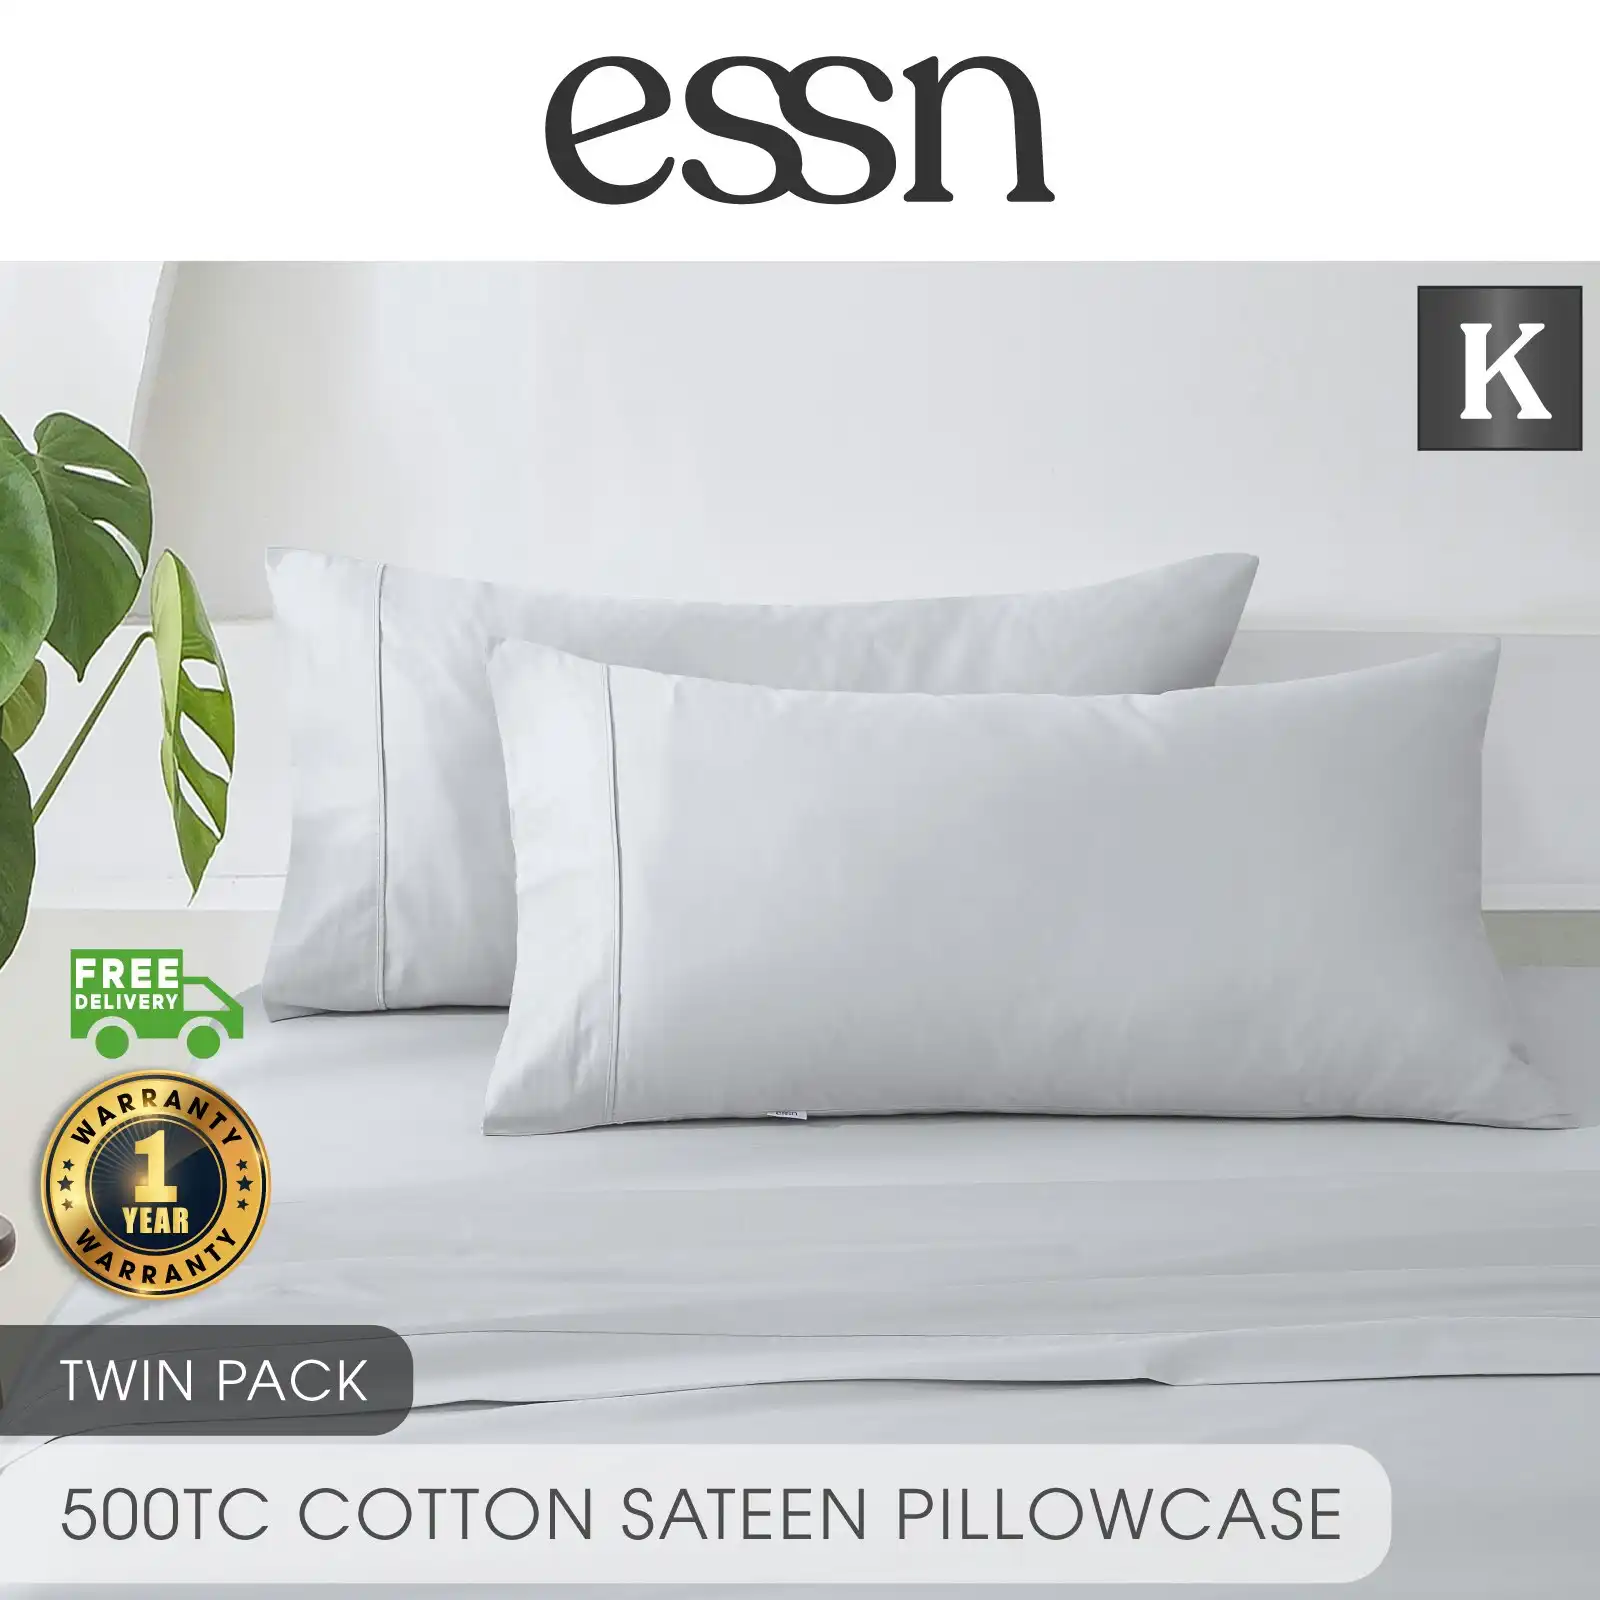 ESSN 500TC Cotton Sateen King Pillowcases Silver (Twin Pack)